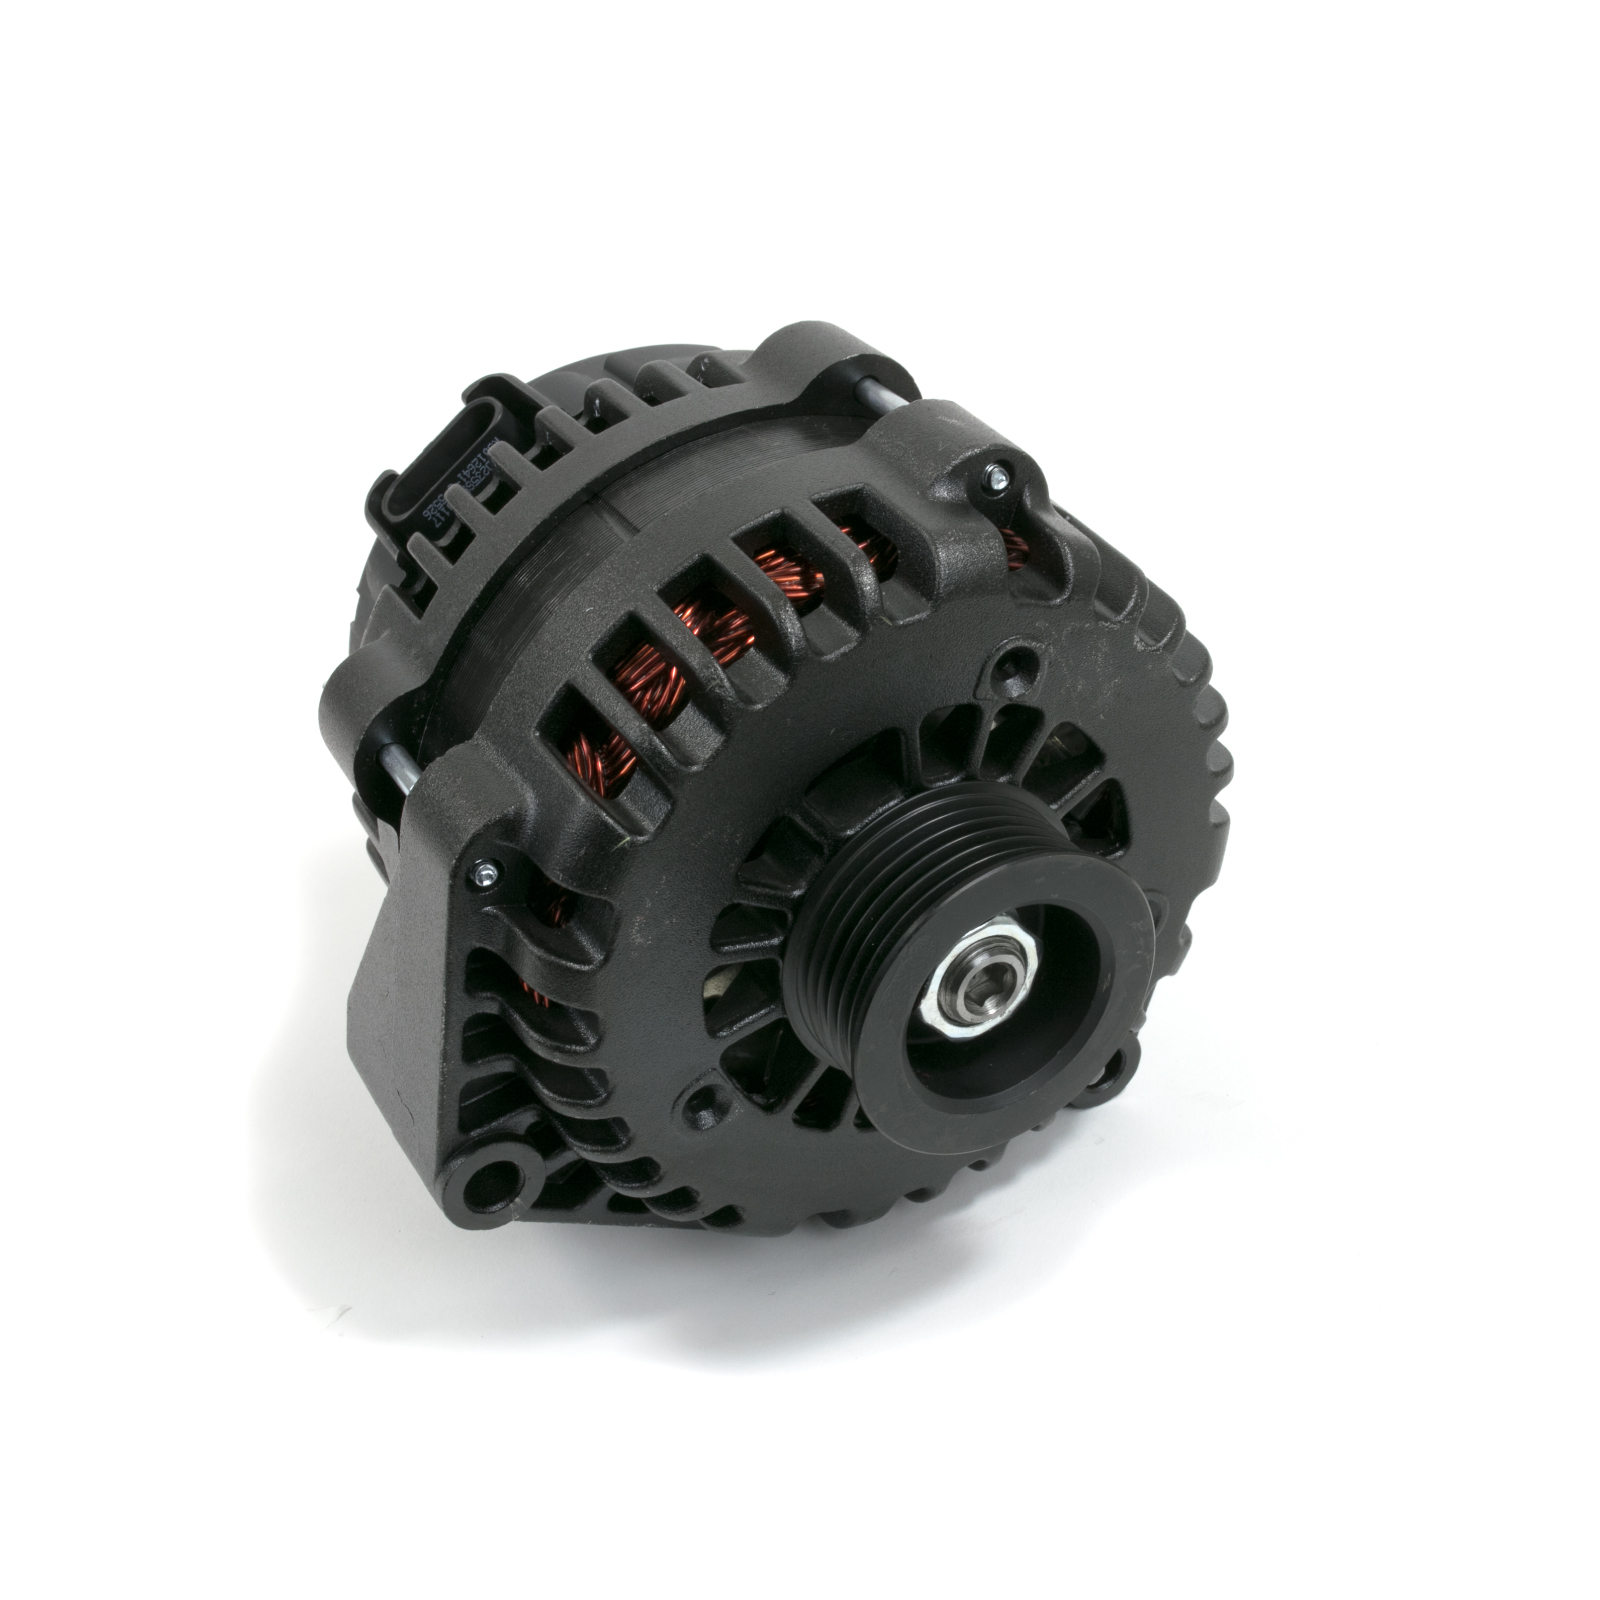 Black GM AD244 Style 220 Amp Alternator with Serpentine Pulley